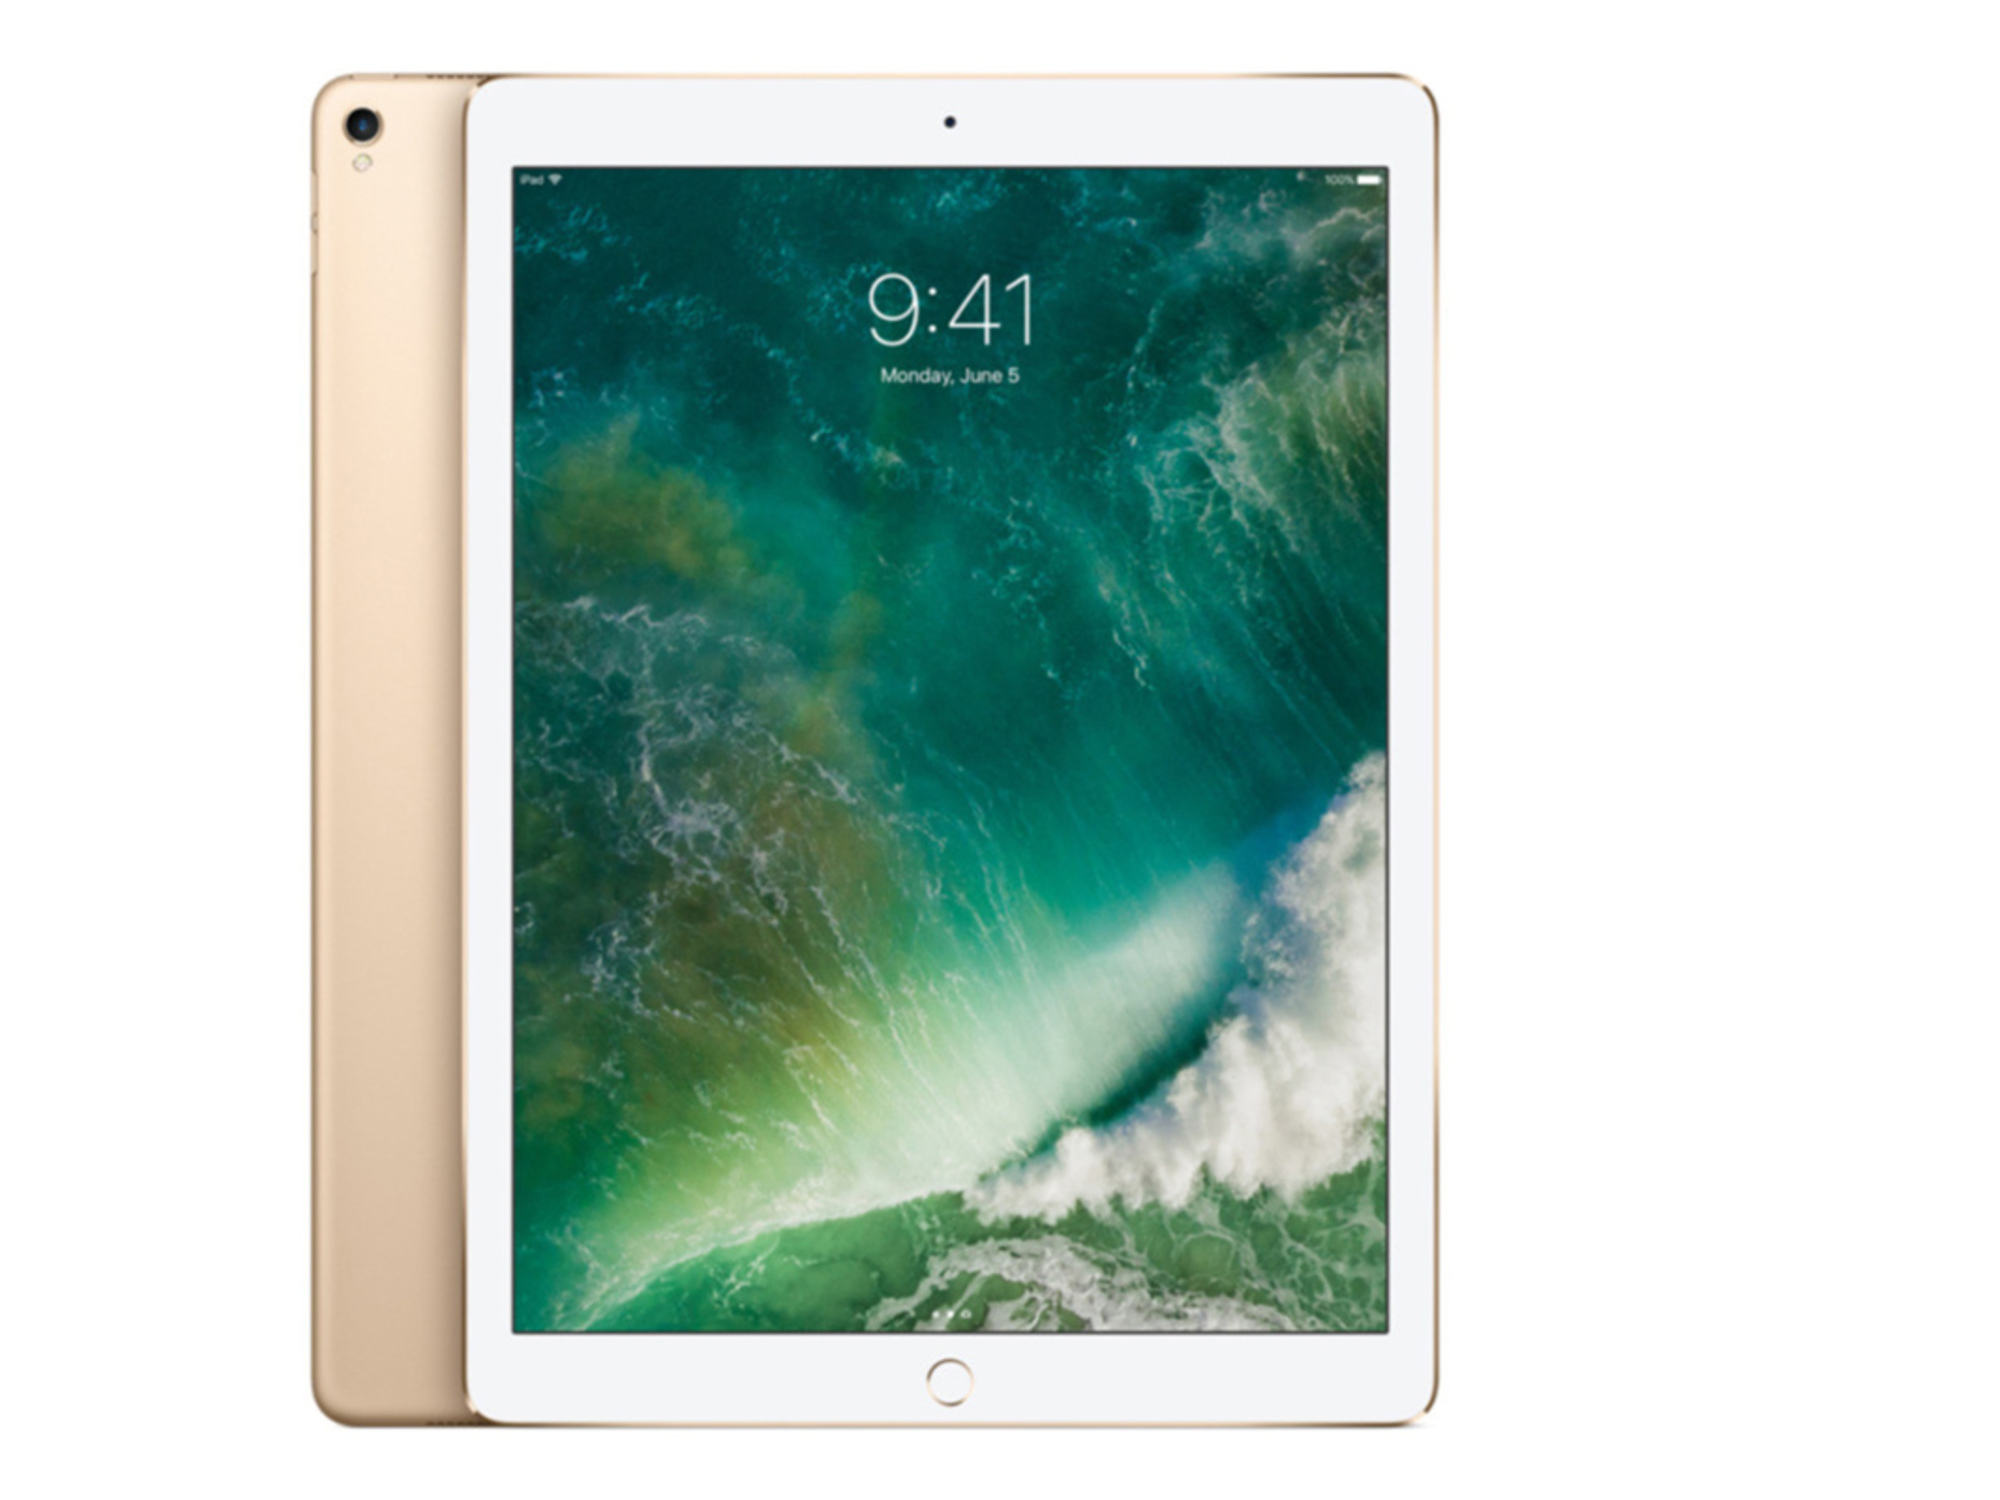 Get yourself 46 percent off this refurbished iPad Pro 12.9″